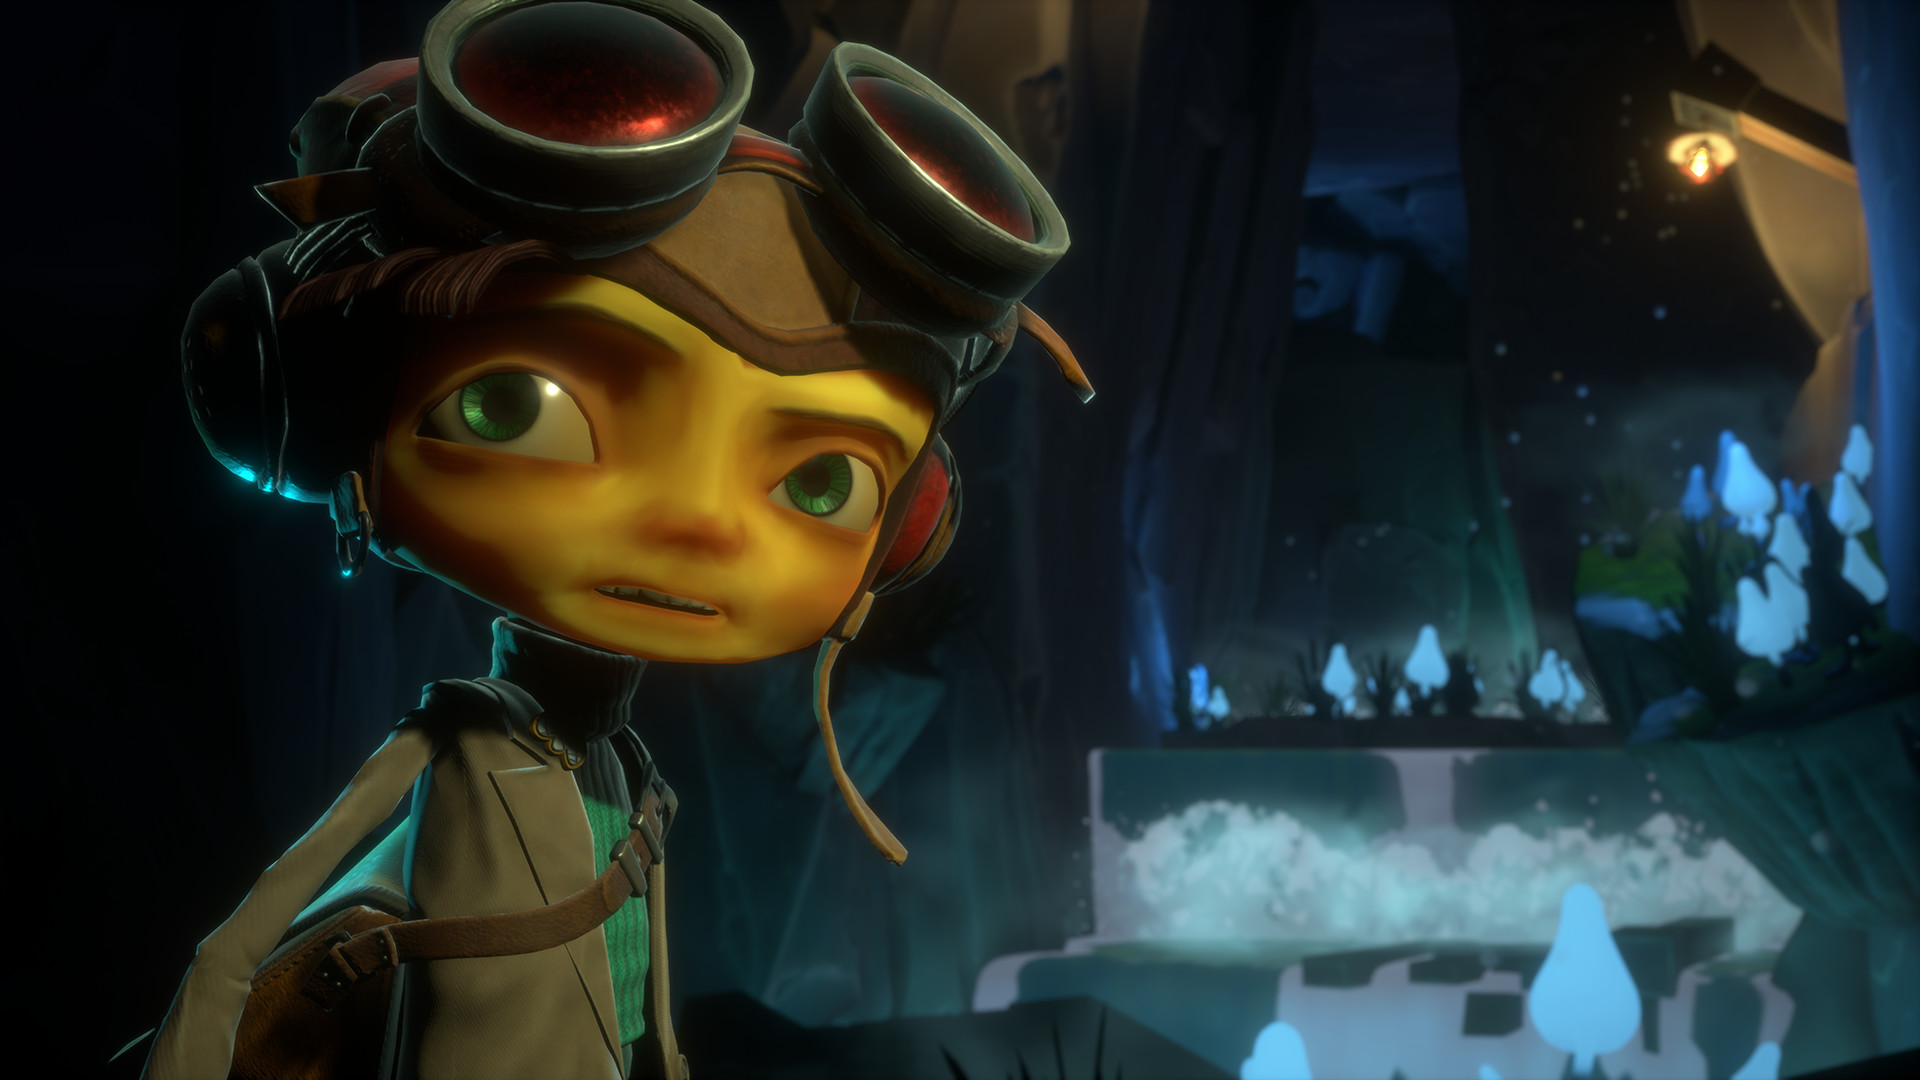  Psychonauts 2 made with 'no crunch' so far, according to senior producer 